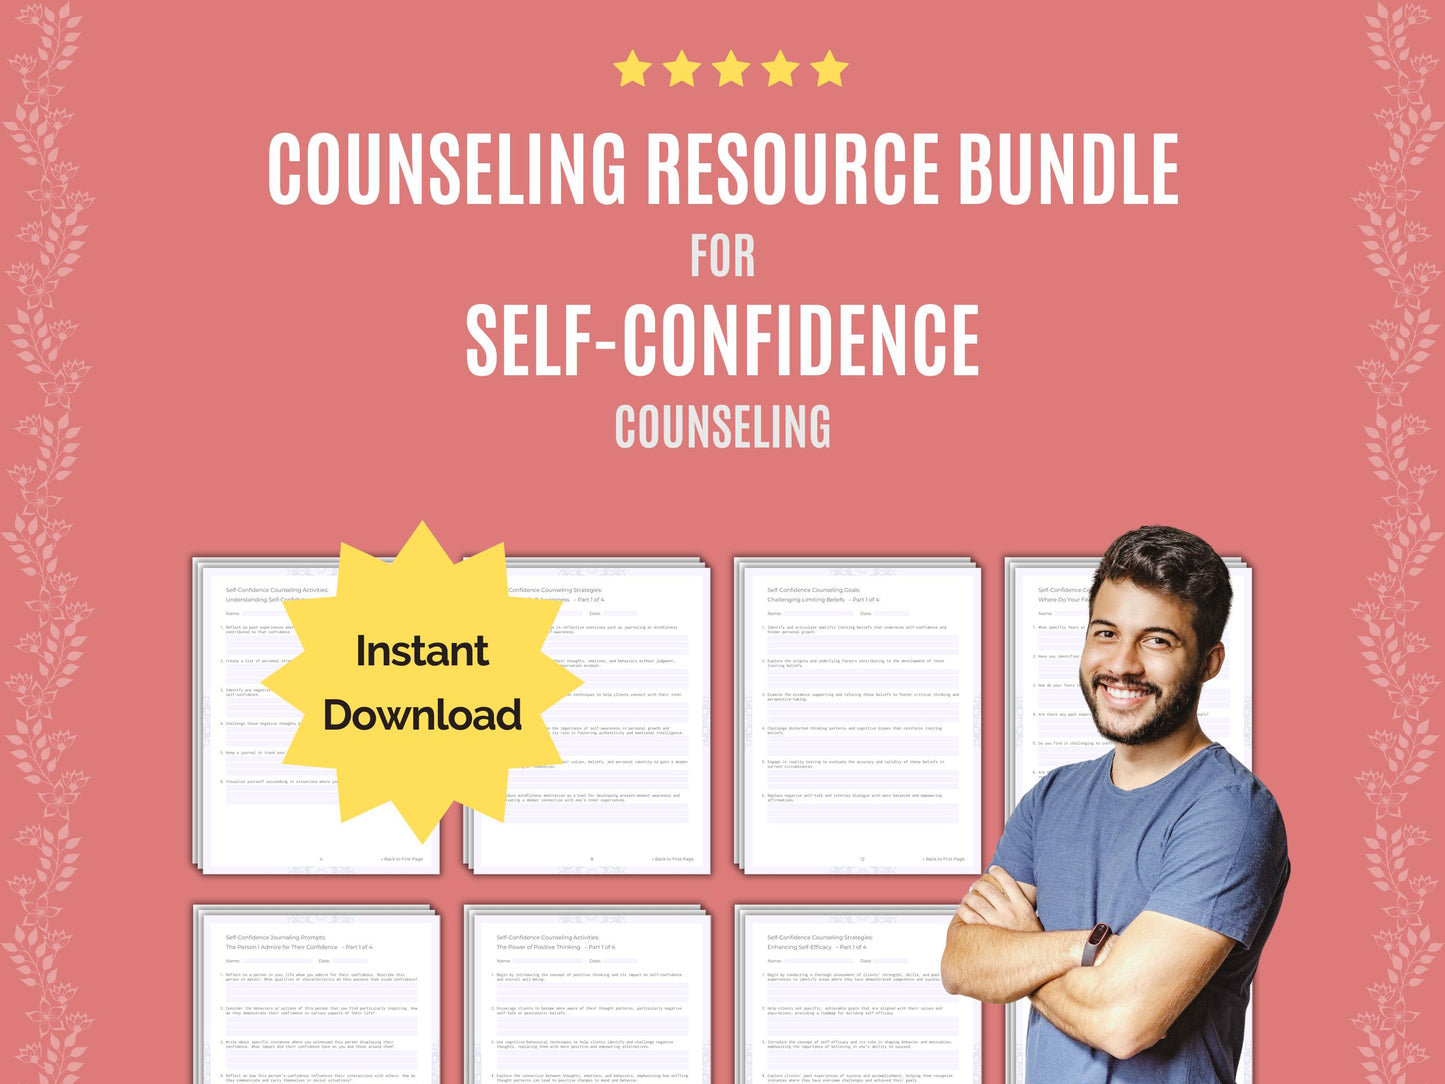 Template, Resource, Self-Confidence, Workbook, Self-Confidence Tool, Therapist, Counseling, Therapy, Mental Health, Self-Confidence Idea, Worksheet, Content, Counselor